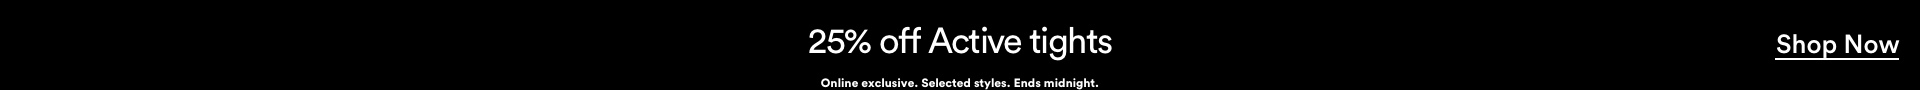 25% off Active Tights. Online exclusive. Selected styles. Ends midnight. Click to Shop Active Tights.